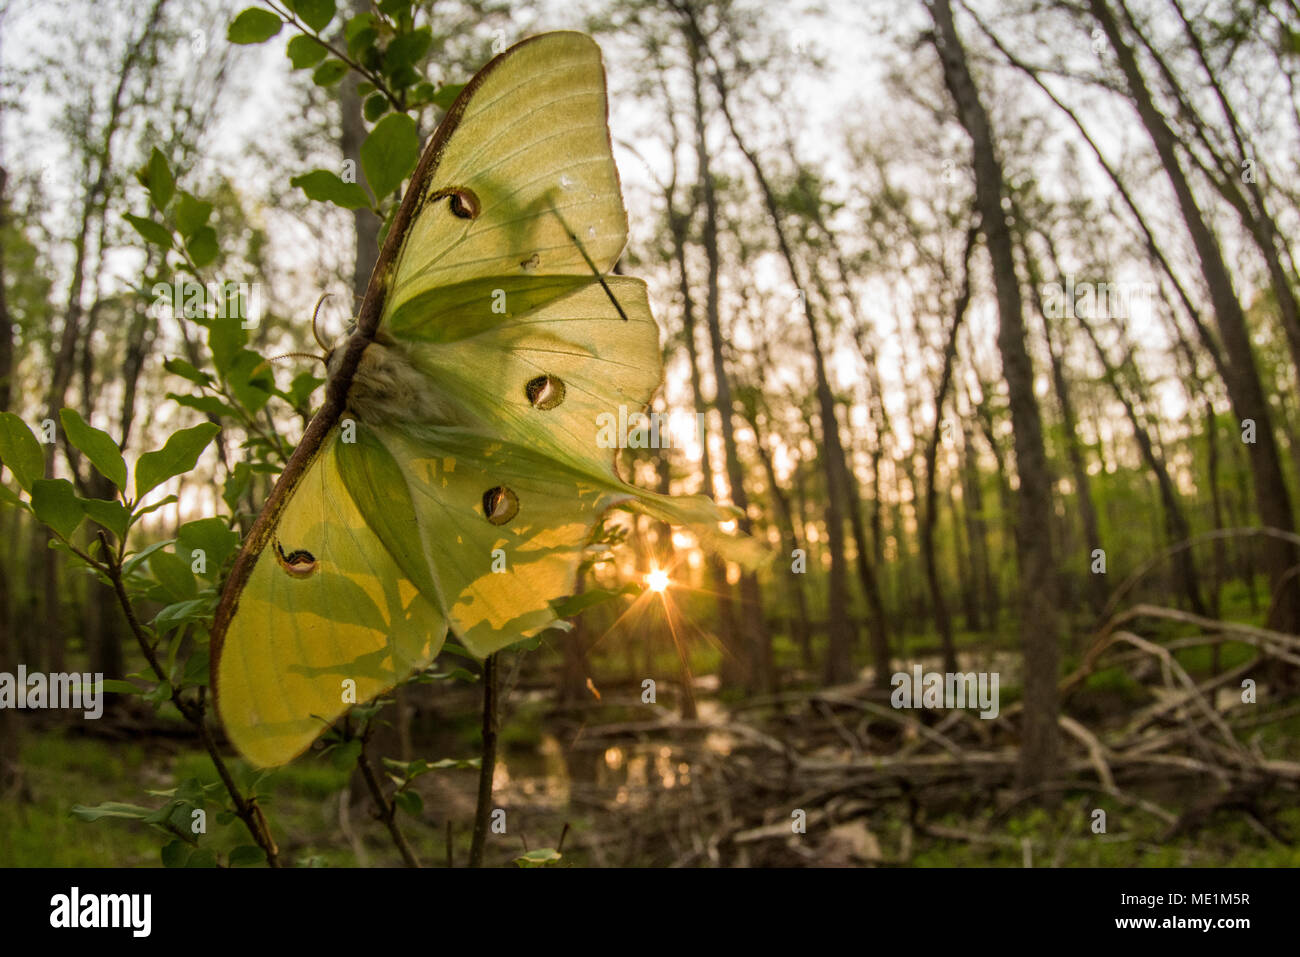 A beautiful female Luna moth from Eastern North Carolina. The lives of these gorgeous moths are ephemeral, the adults only live about a week. Stock Photo